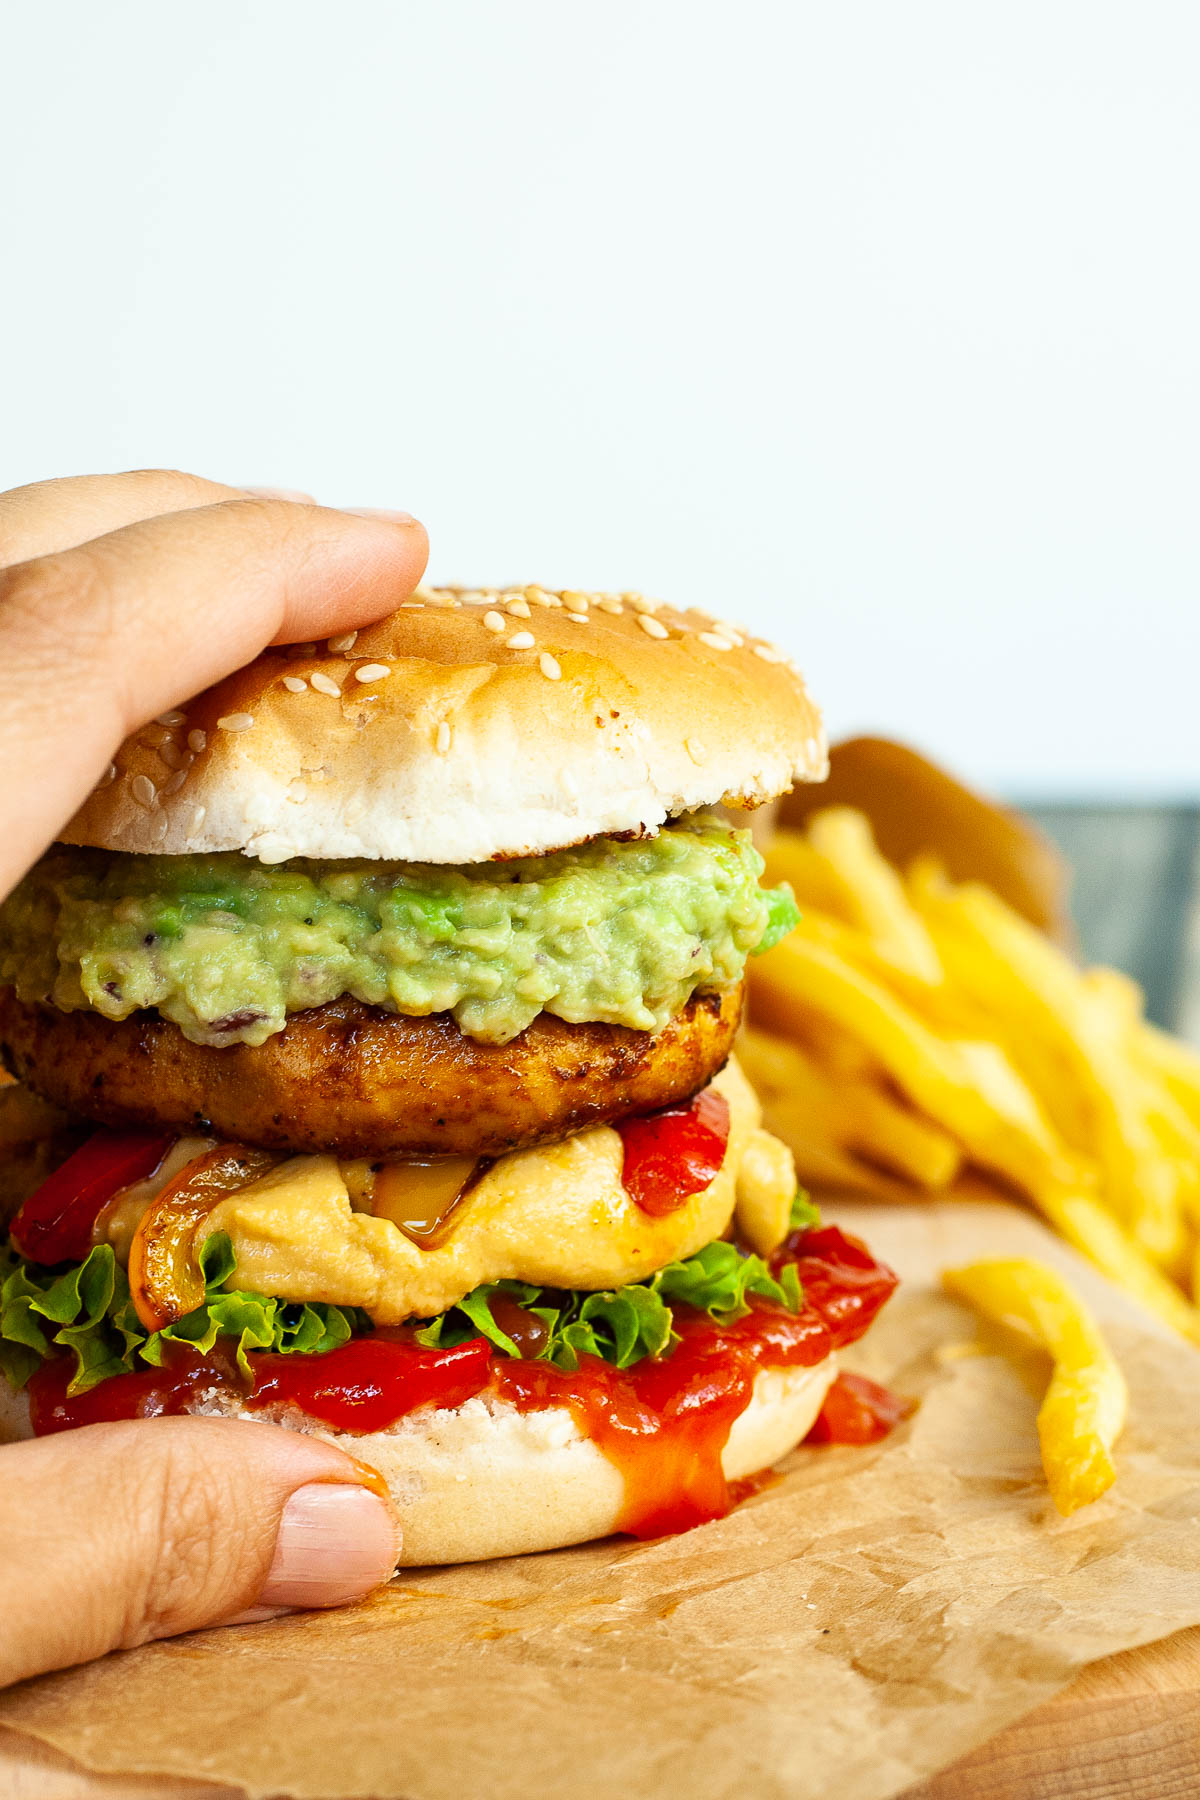 A hand is holding a burger with ketchup, lettuce, yellow cheese sauce, bell peppers, guacamole and grilled mushroom cap on brown paper. French fries are placed next to it.